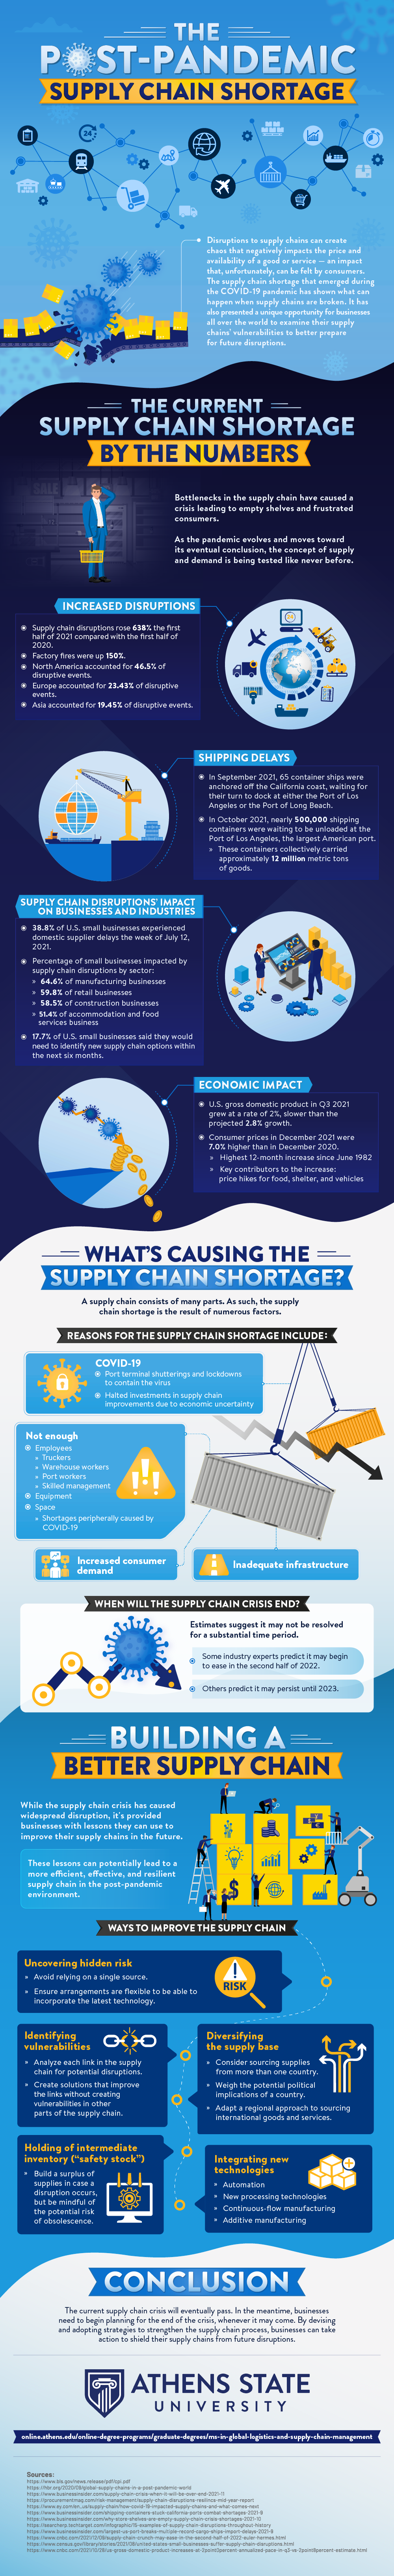 The post-pandemic supply chain shortage statistics and ways to improve. 